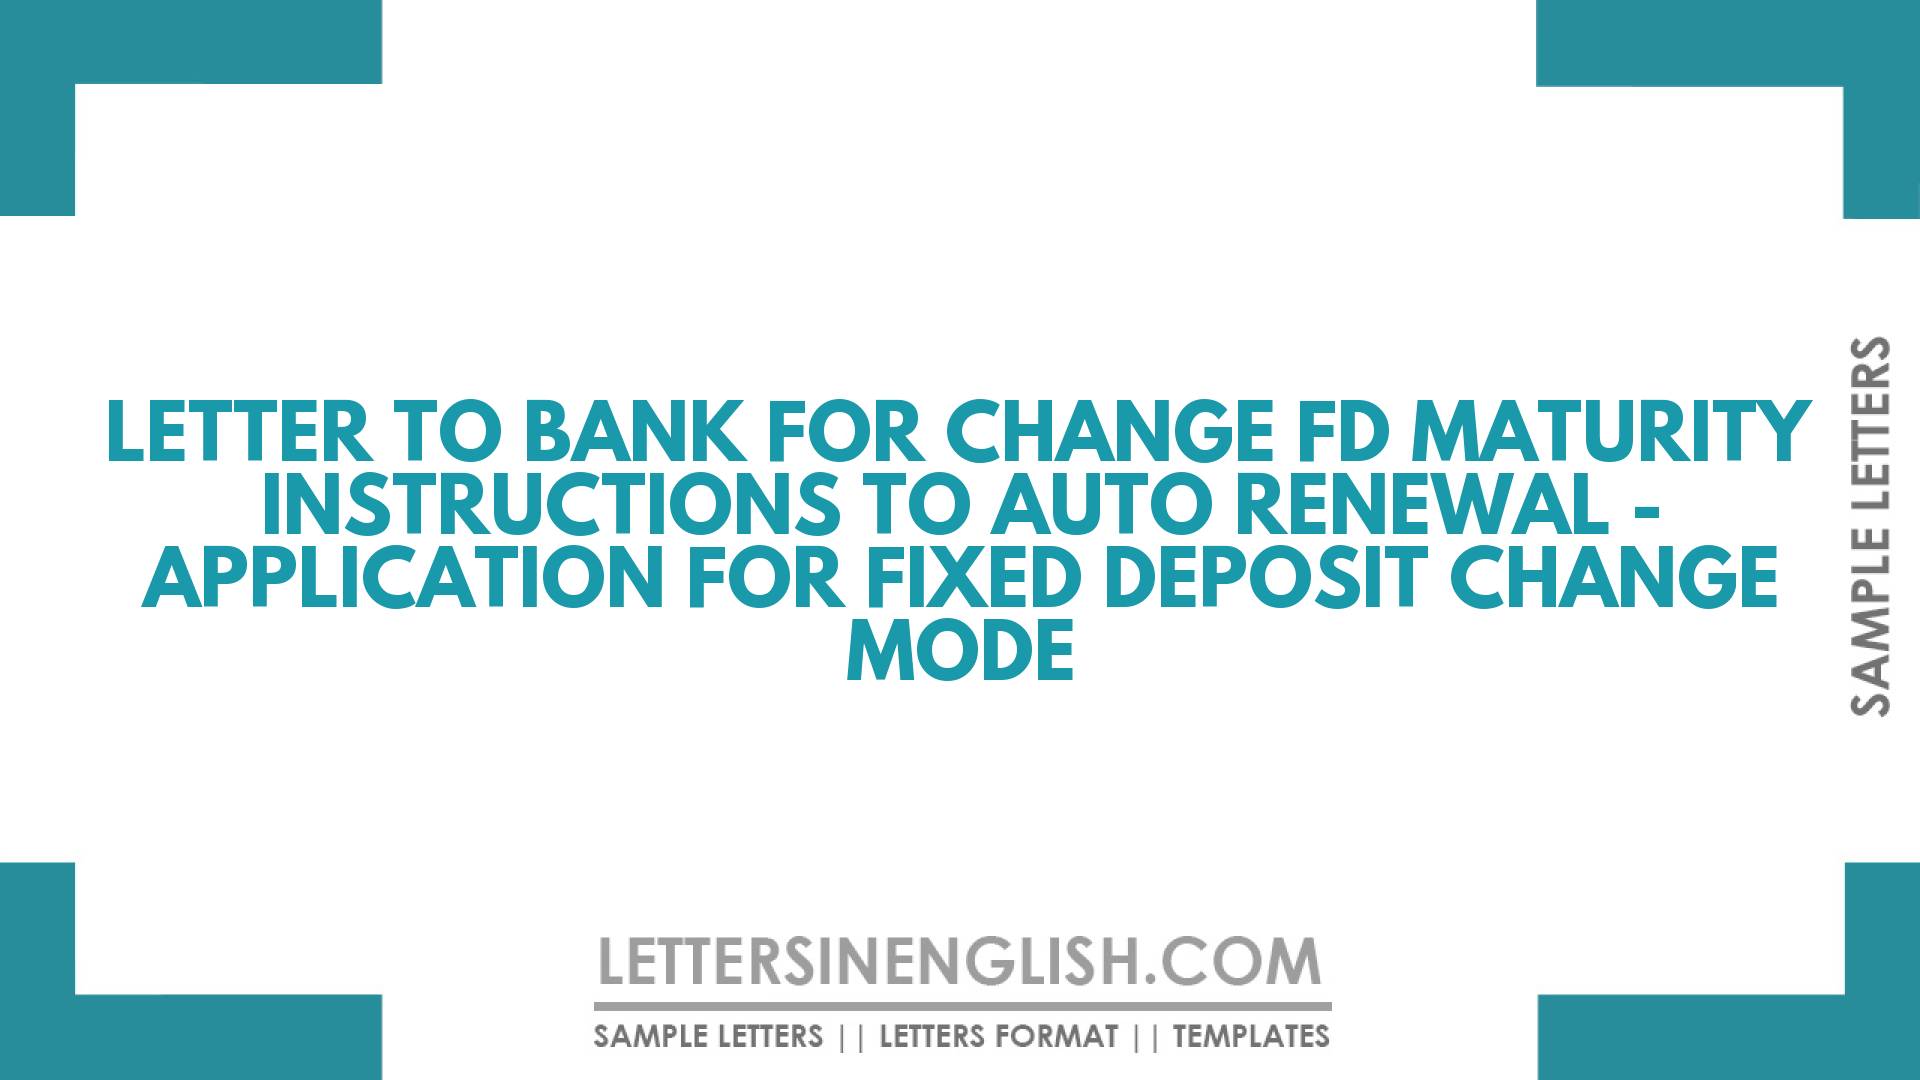 Letter to Bank for Change FD Maturity Instructions to Auto Renewal – Application for Fixed Deposit Change Mode